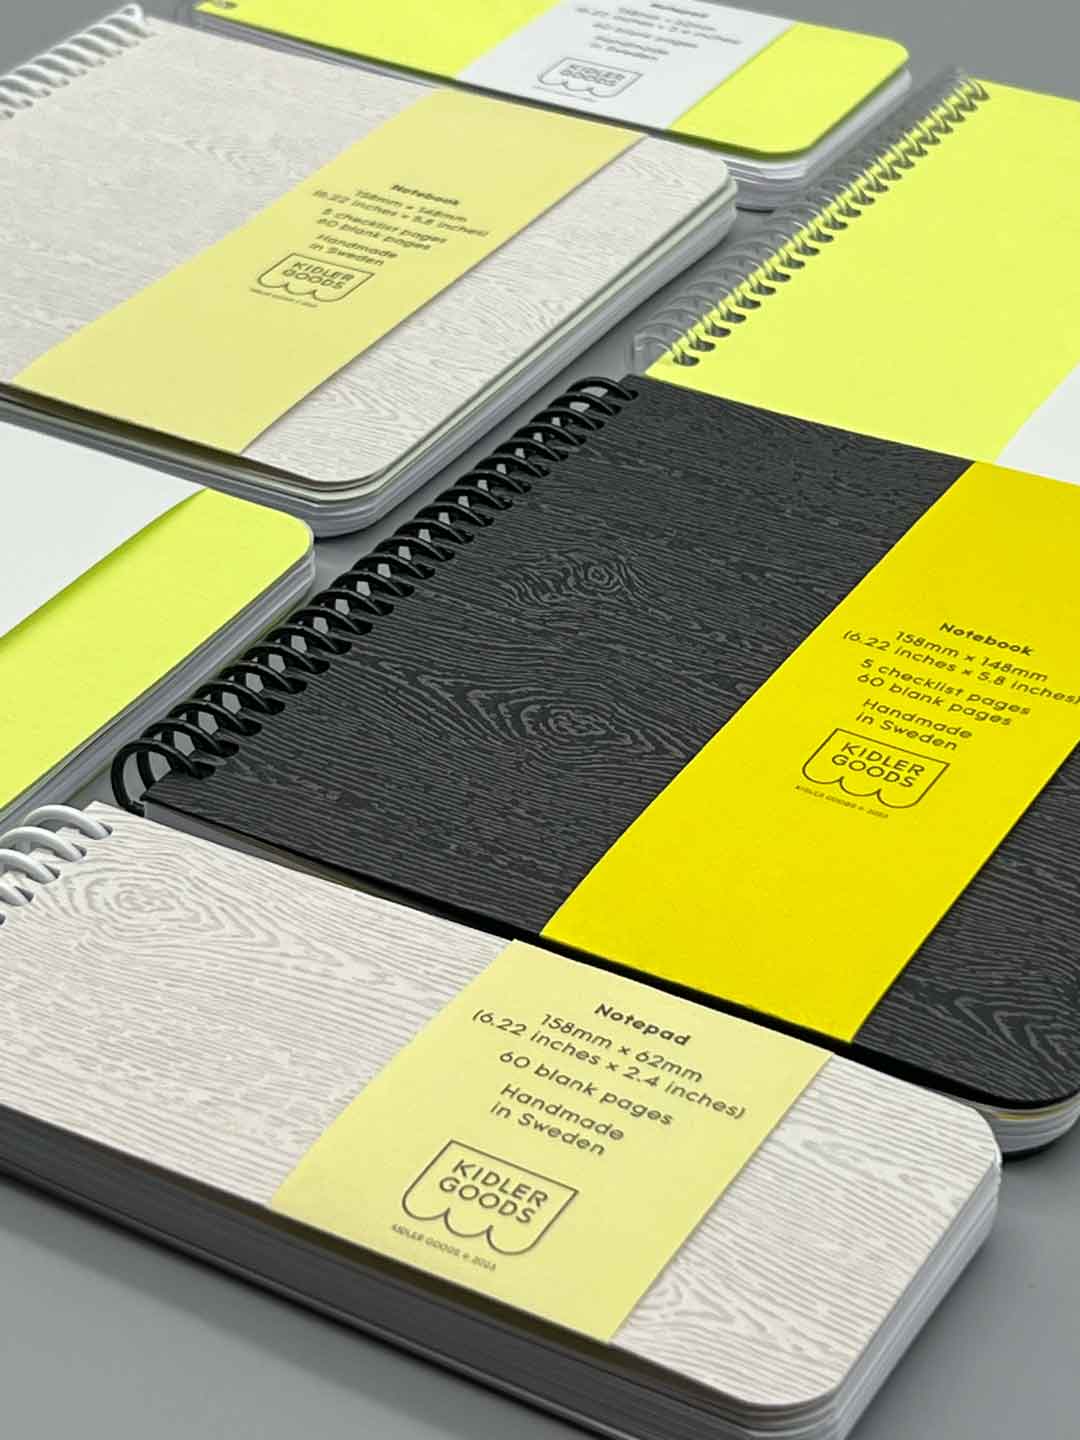 Notebooks and notepads of different sizes and colours